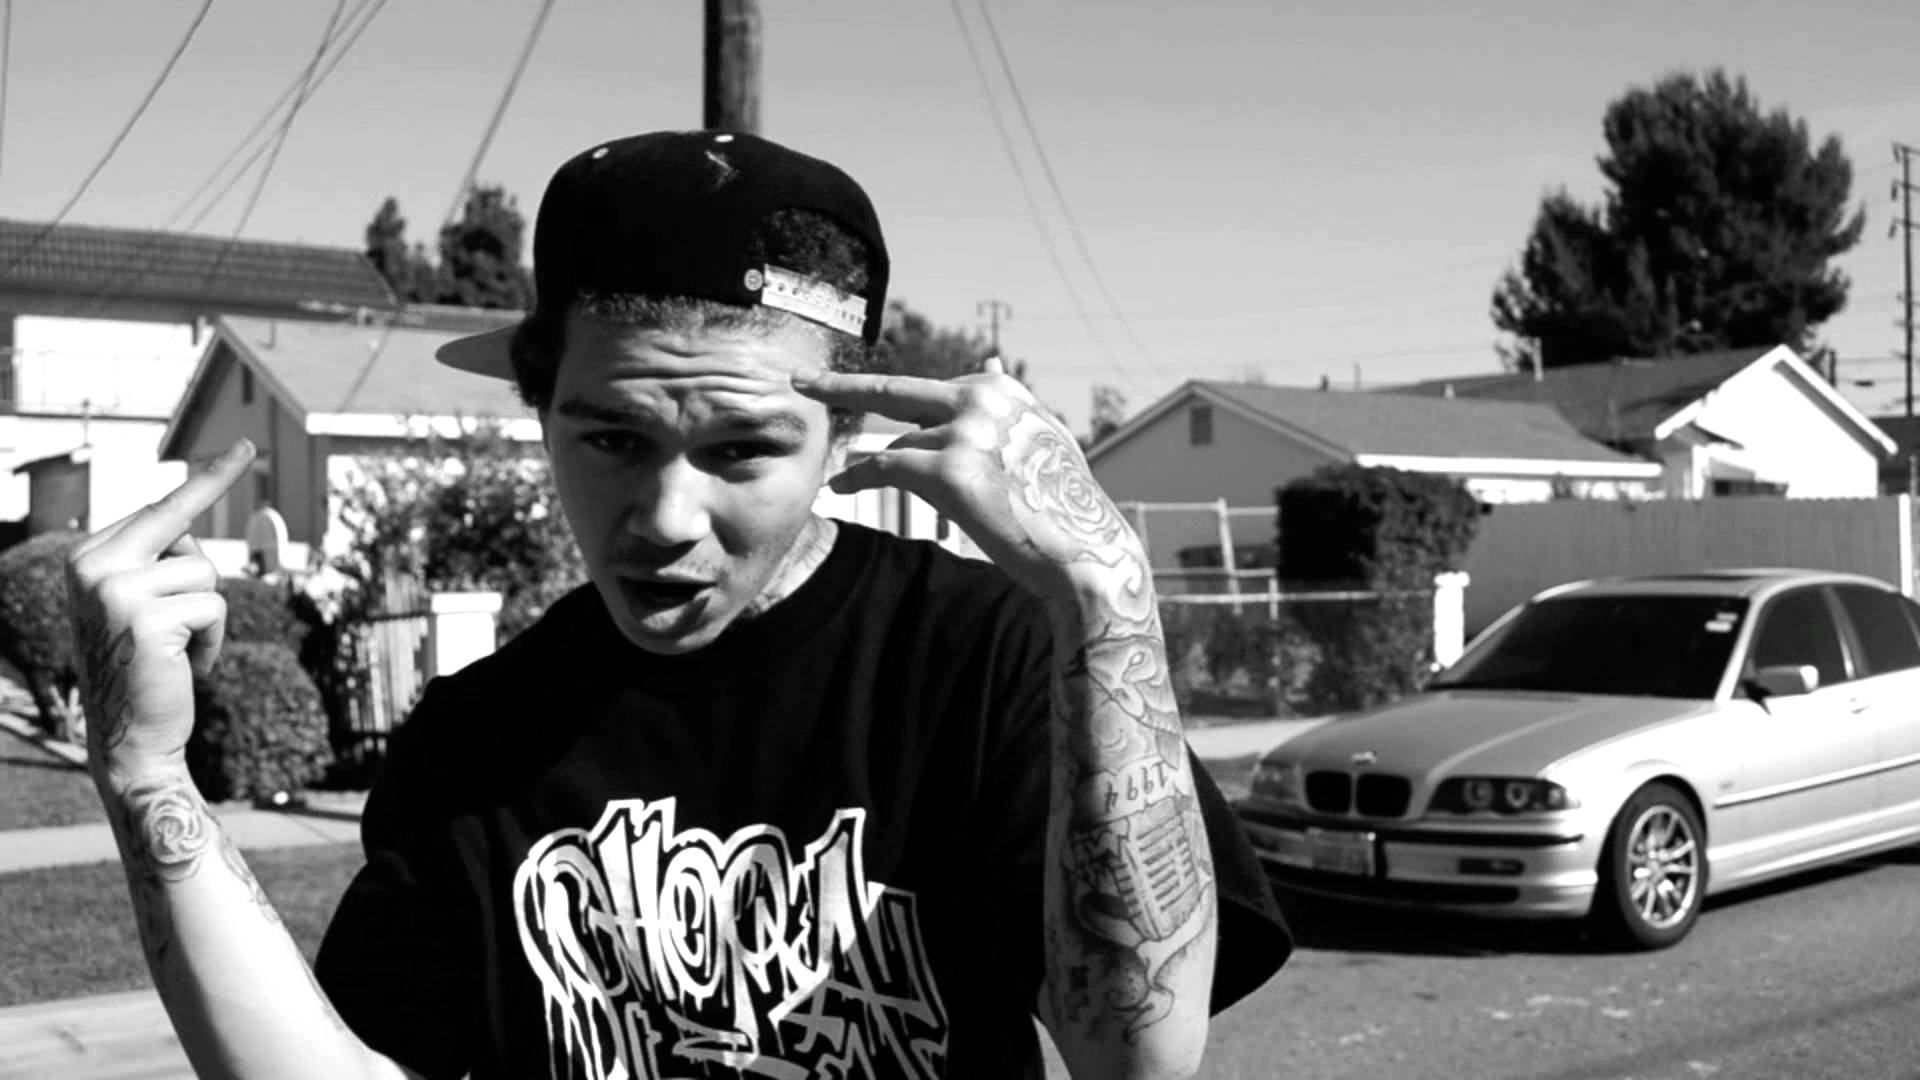 All Day Phora